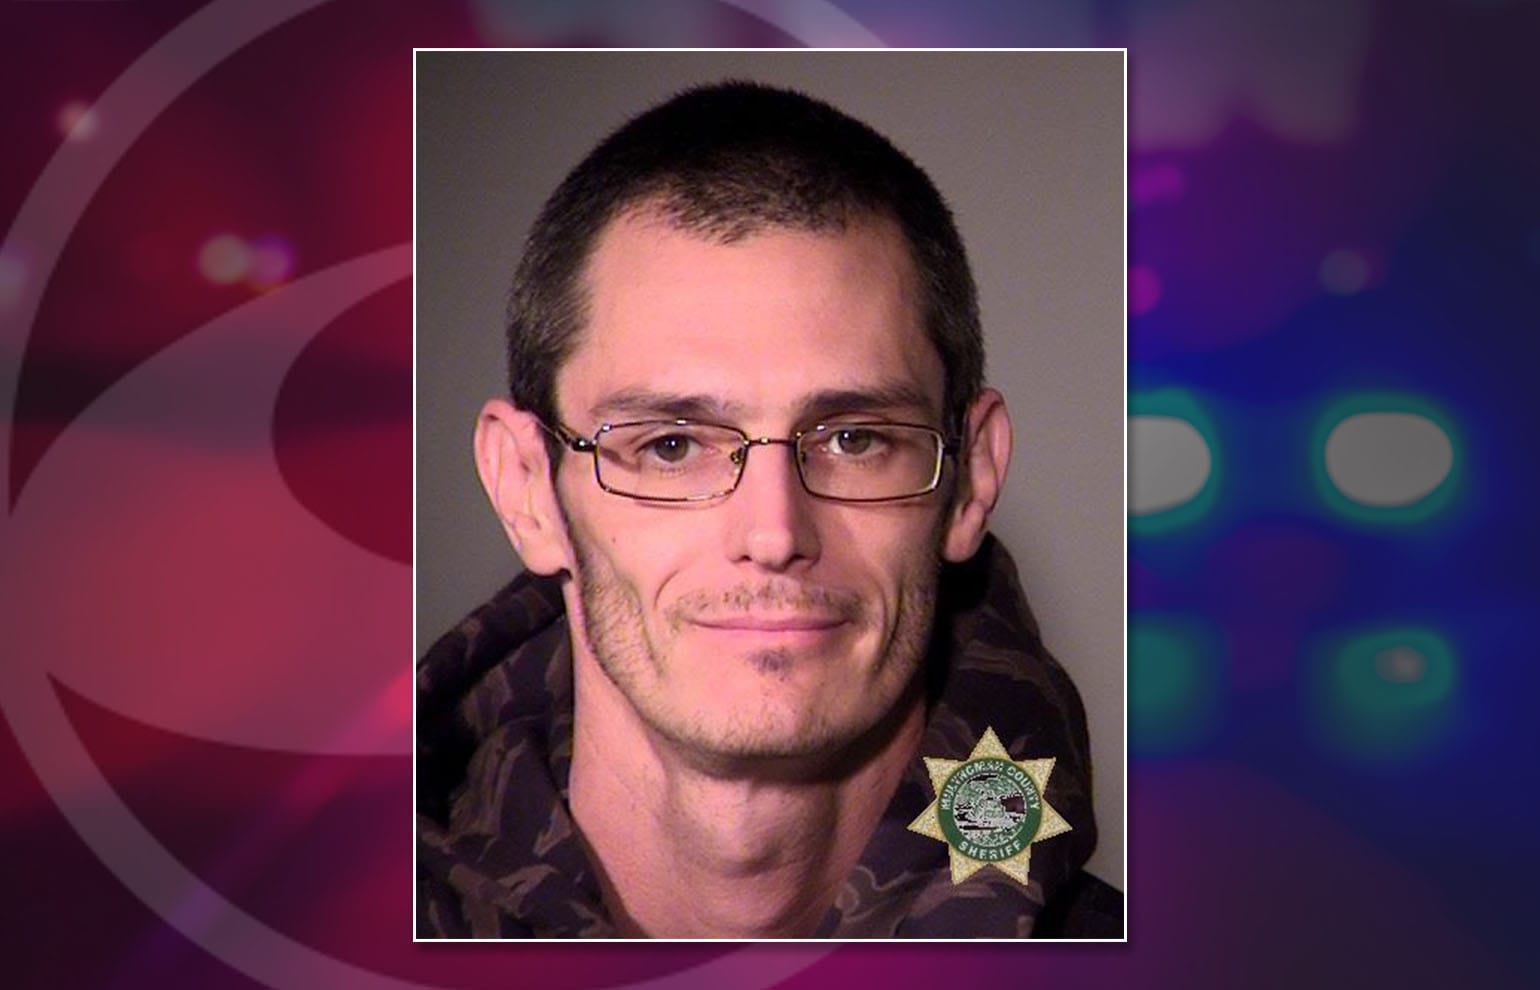 Michael Lail, 37, of Vancouver, was arrested Wednesday in Portland by a cross-state law enforcement task force. Officers reportedly found guns and various drugs.